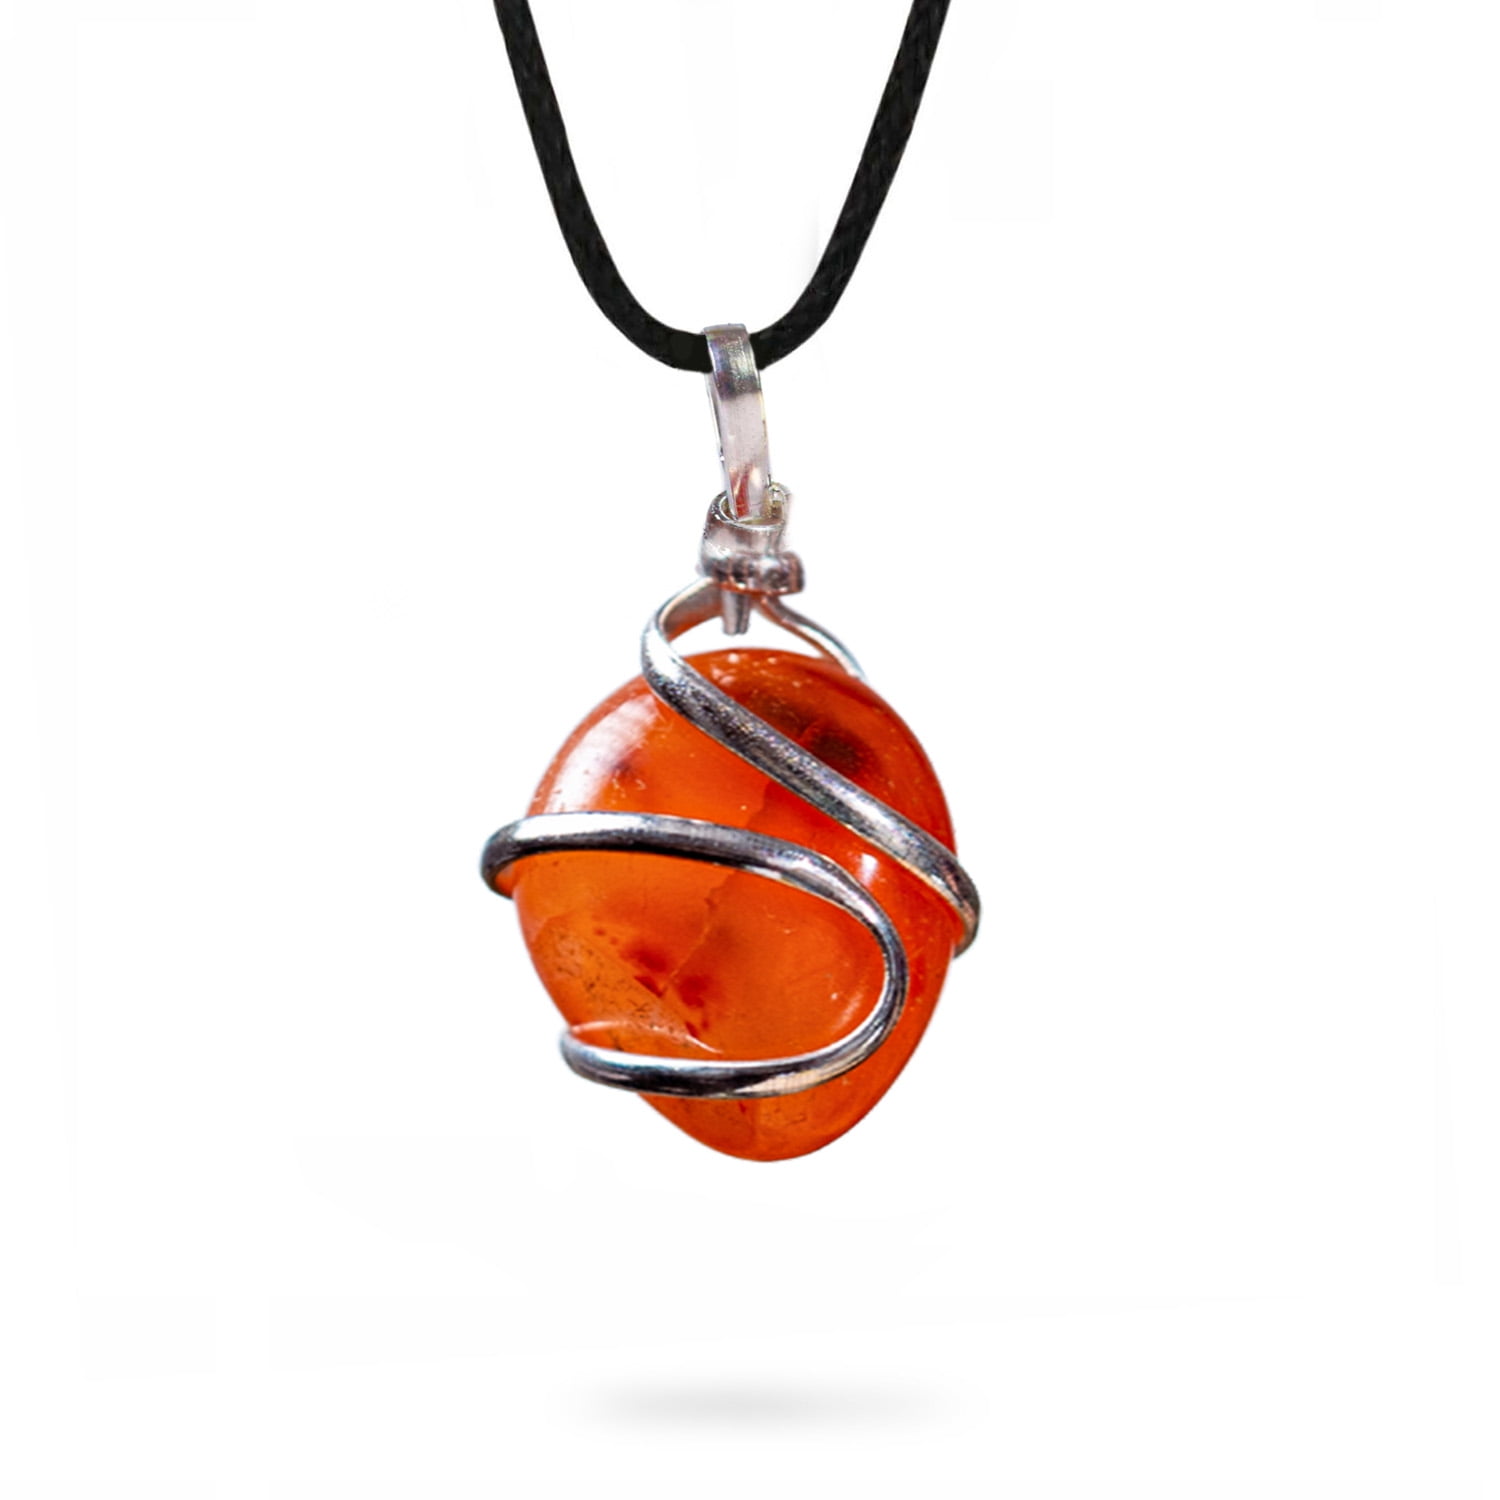 Pendant Bead in CARNELIAN Necklace Tumbled Crystal Healing Chakra Quality A+